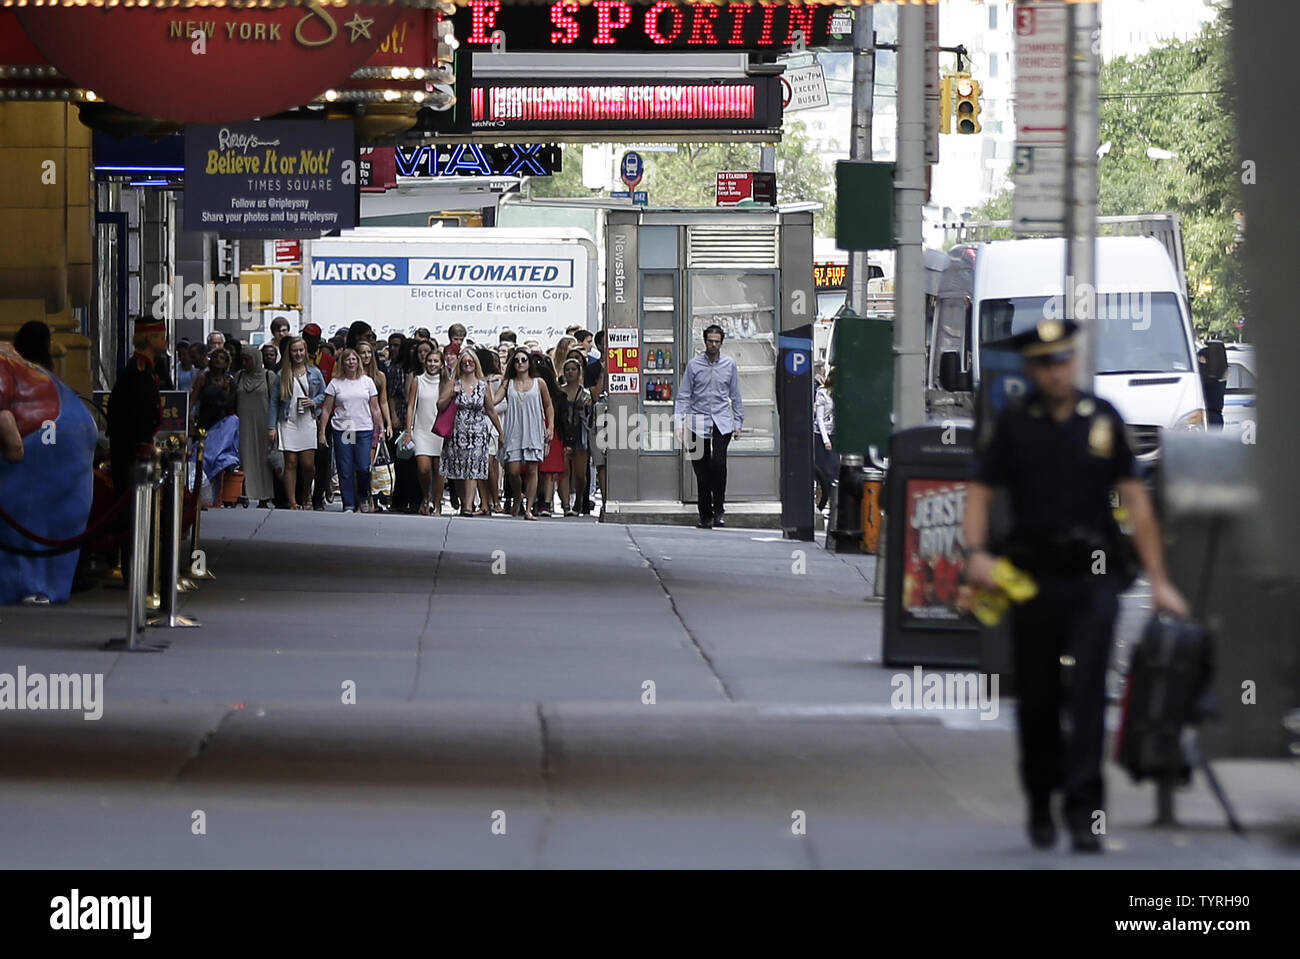 Pedestrians watch as an NYPD Police Officer carries away a bag in Times Square after reports of a suspicious package sent police and the Bomb Squad to the scene on September 21, 2016 in New York City. The package turned out to be an empty suitcase and the all clear was given shortly after. Tensions are still high days after an explosion from a bomb went off on West 23rd Street in Manhattan on Saturday, injuring 29 people, shattering windows and prompting widespread street closures on West 23rd Street.      Photo by John Angelillo/UPI Stock Photo